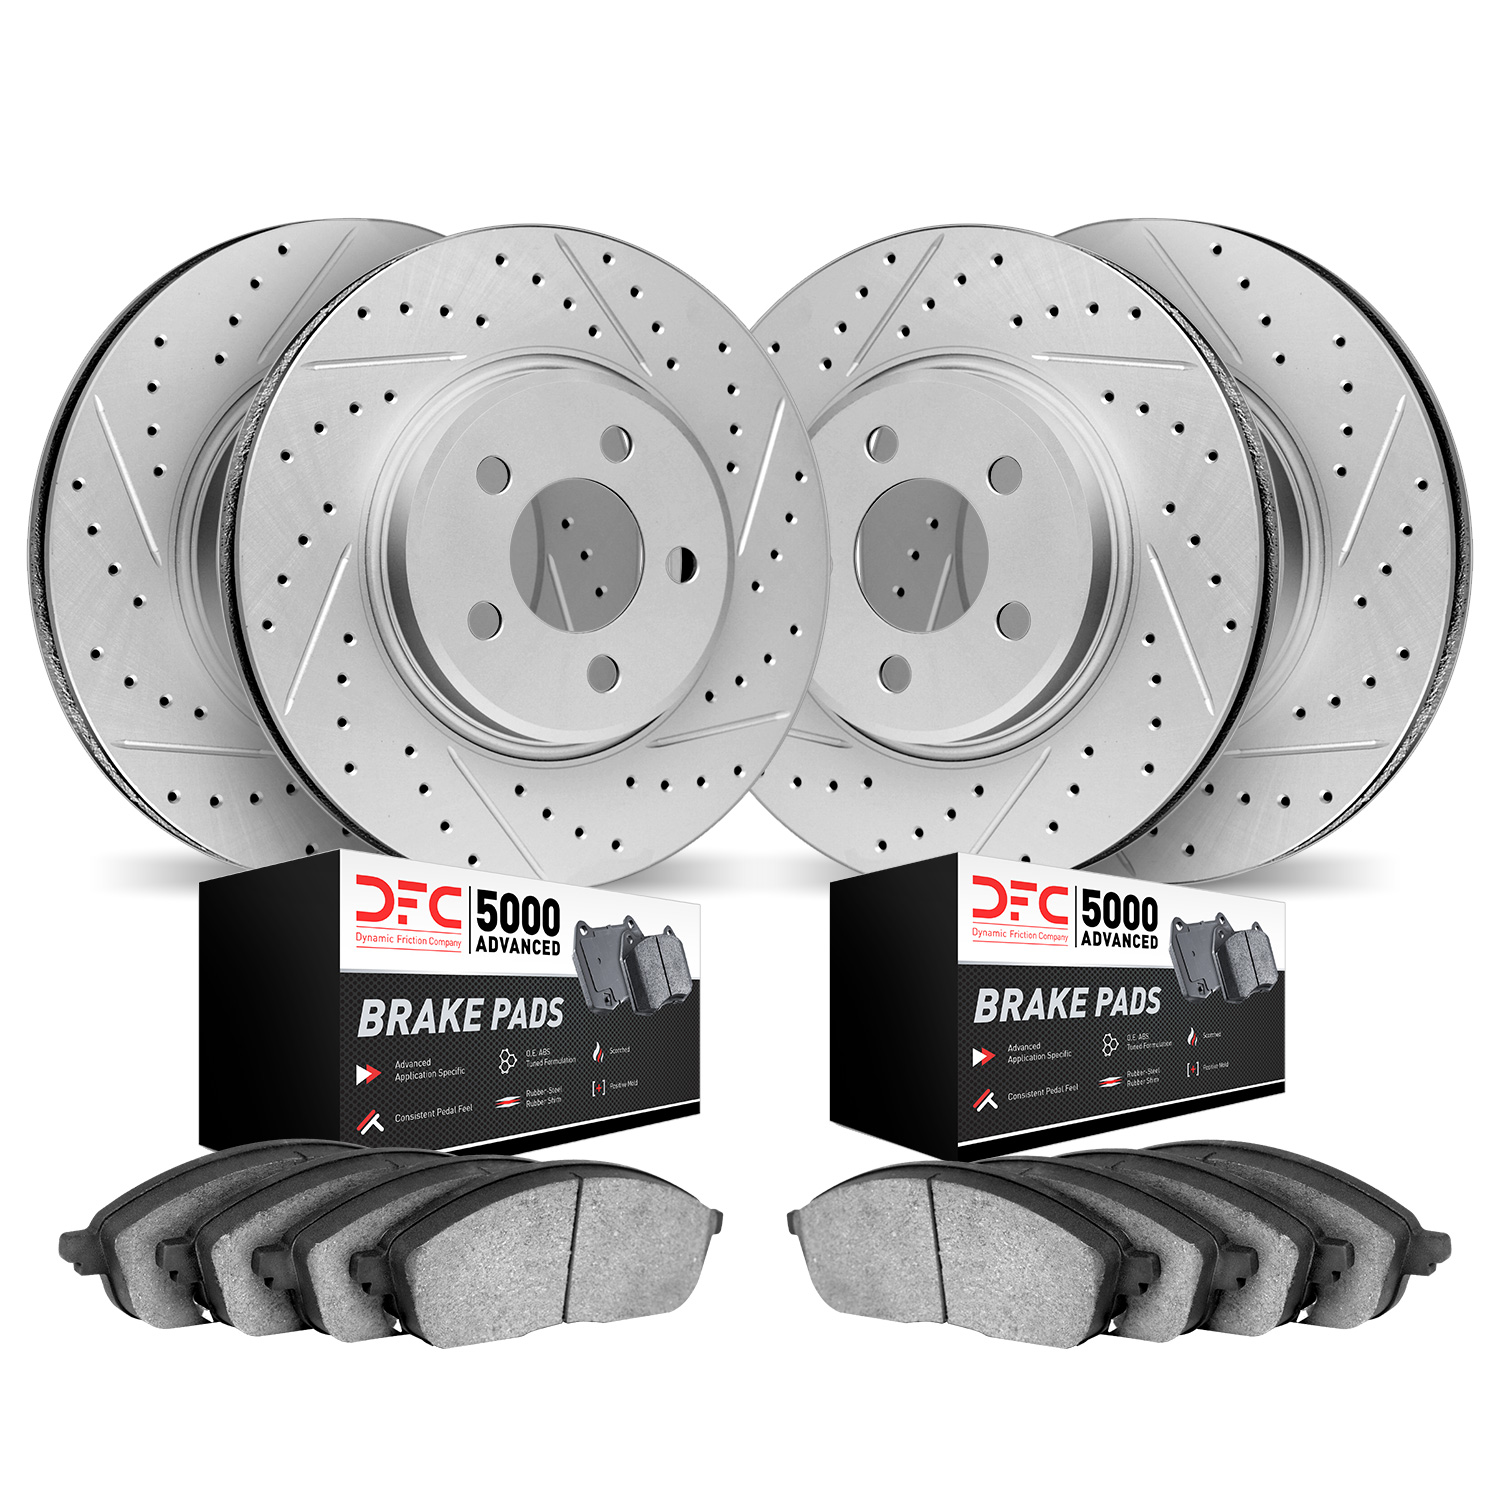 2504-67063 Geoperformance Drilled/Slotted Rotors w/5000 Advanced Brake Pads Kit, 2011-2019 Infiniti/Nissan, Position: Front and